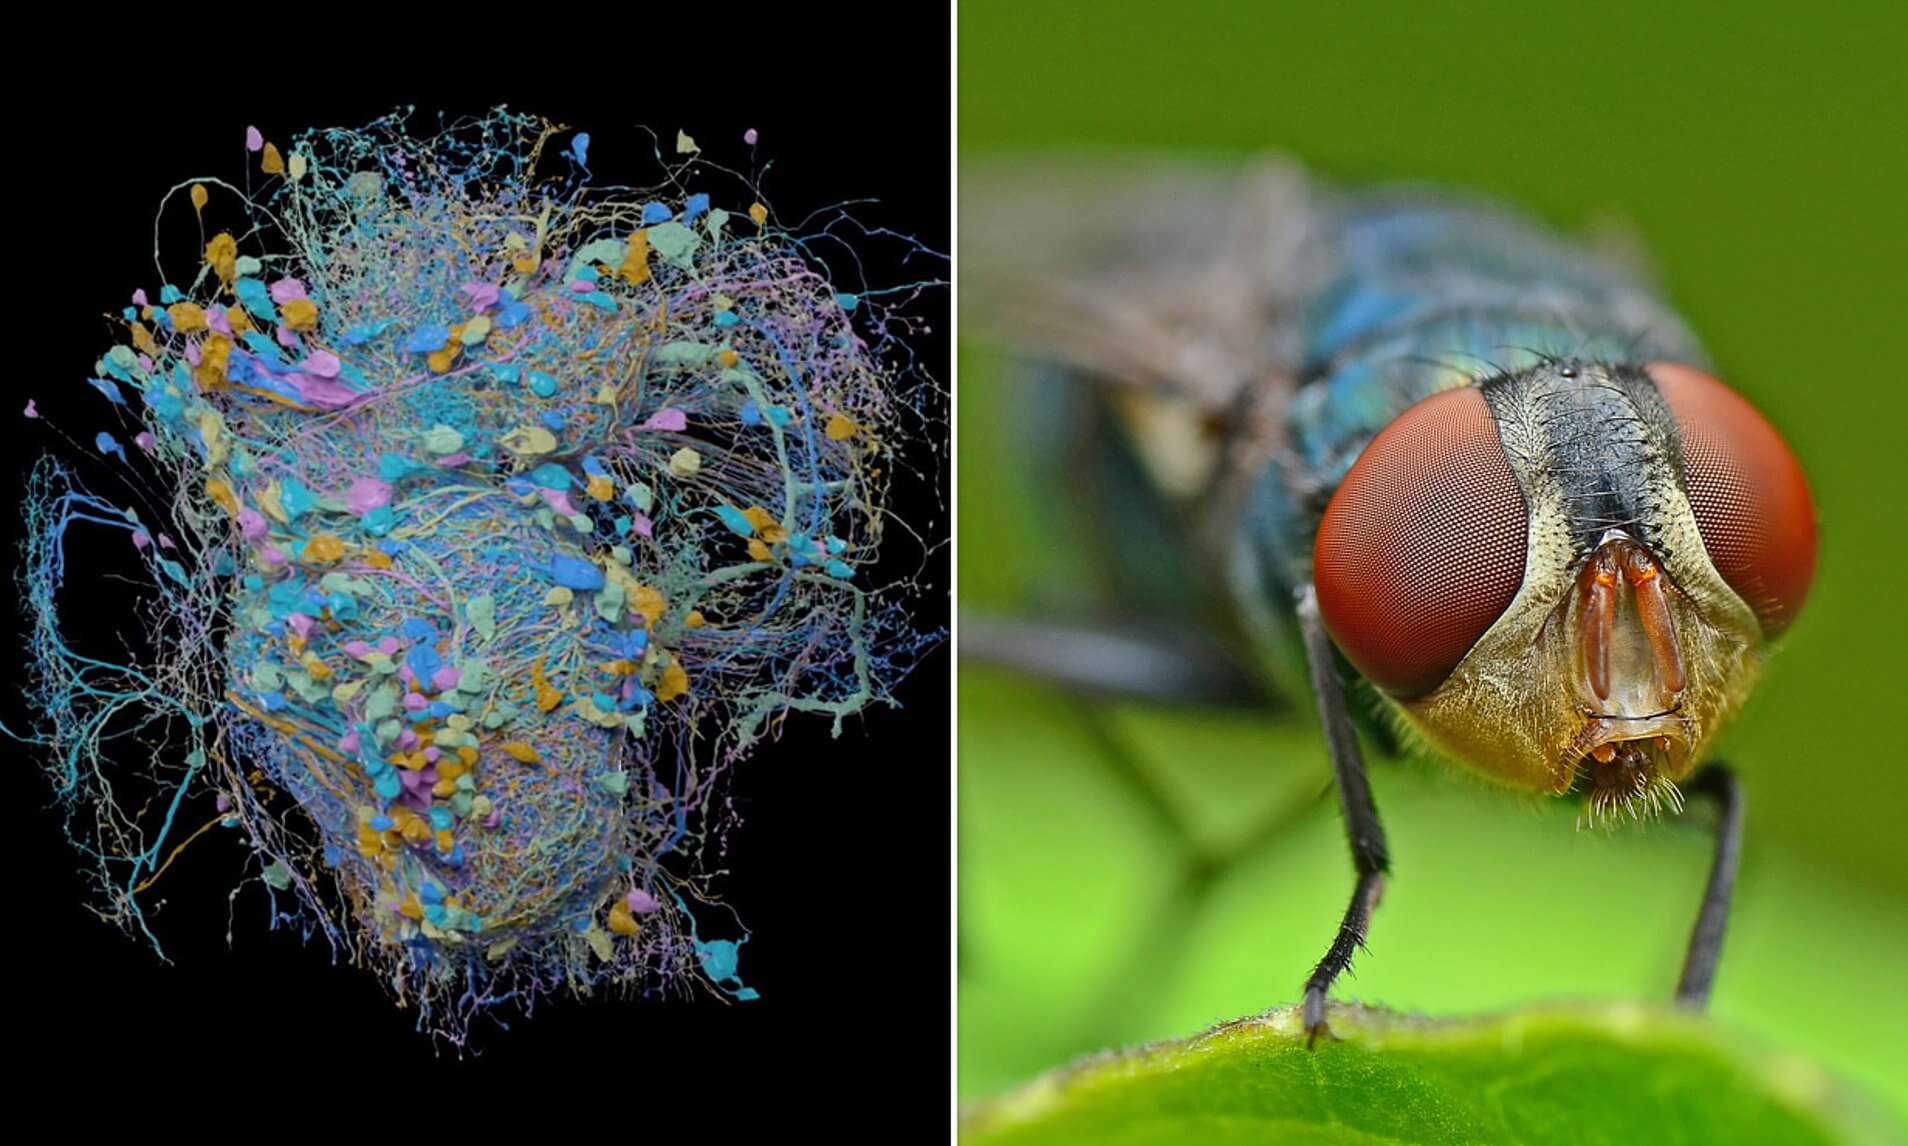 #video | Scientists have created a detailed 3D map of the brain of the fruit fly